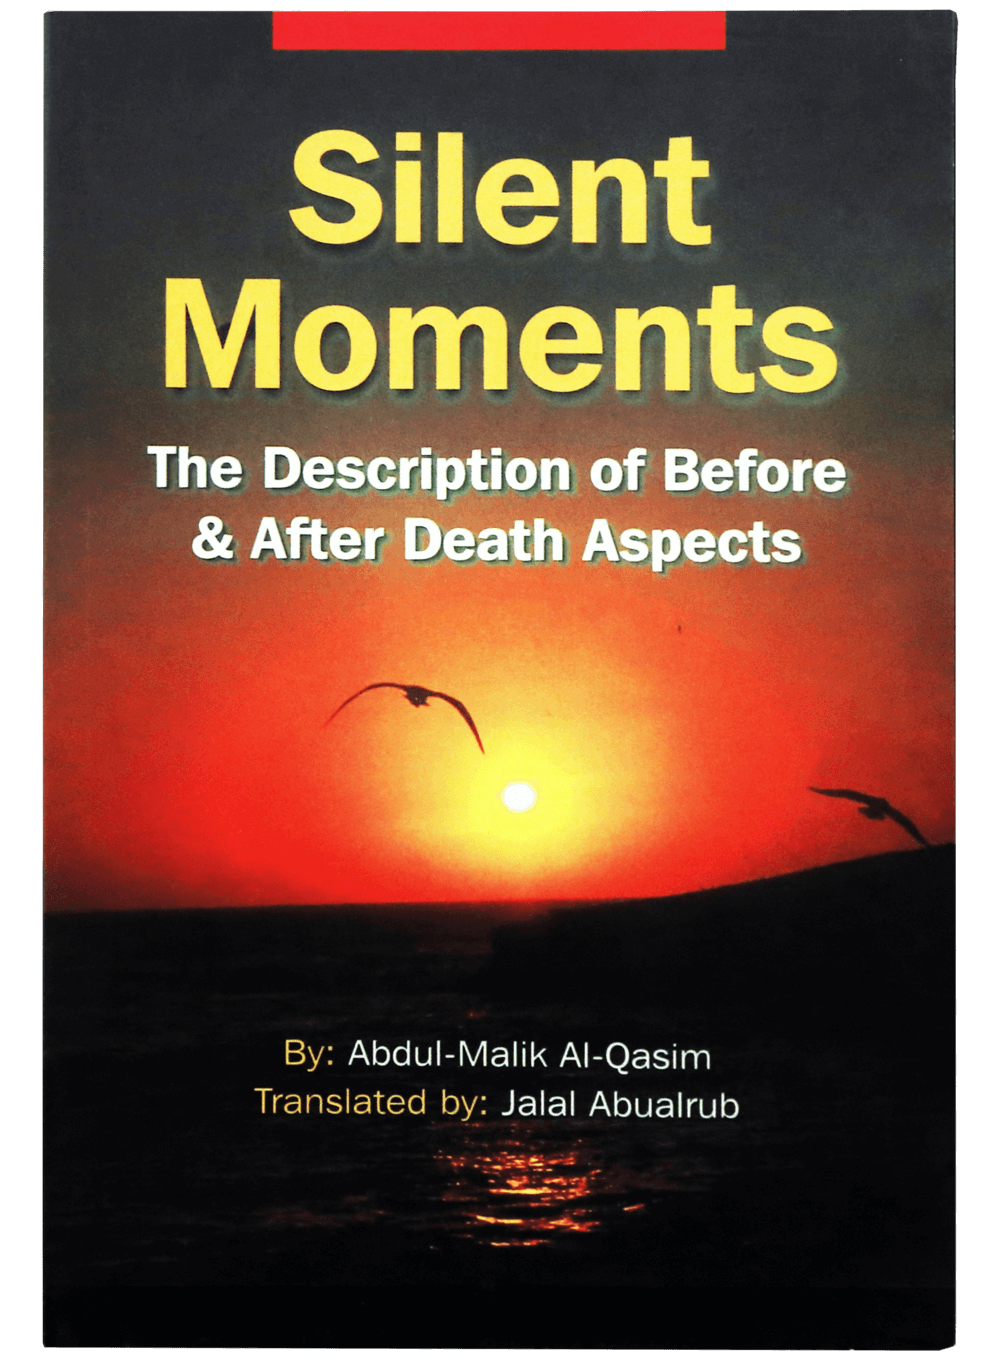 silent-moments-darussalam-20180528-114706